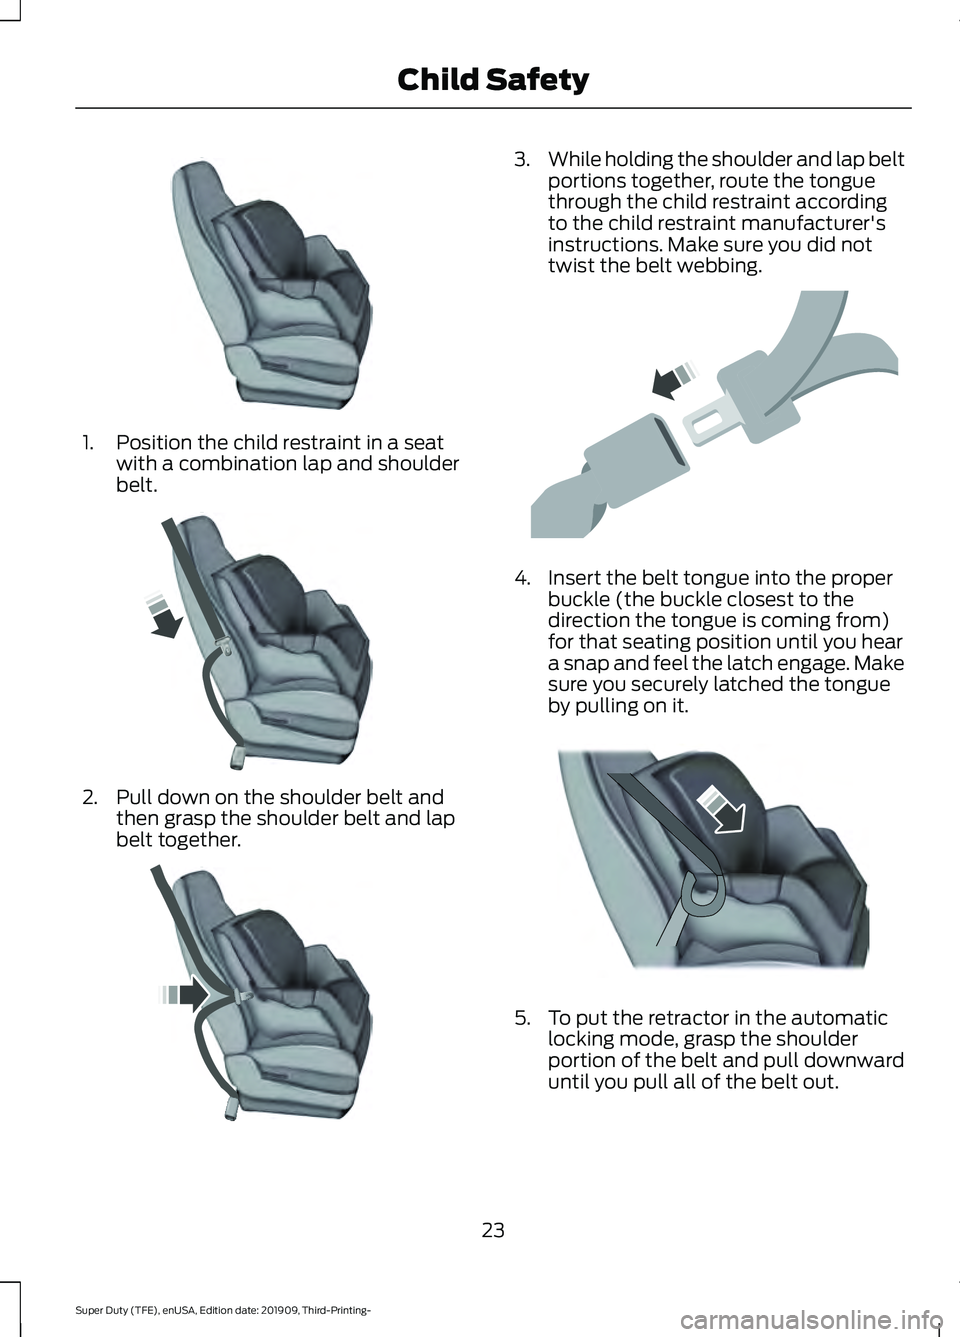 FORD F-450 2020  Owners Manual 1. Position the child restraint in a seat
with a combination lap and shoulder
belt. 2. Pull down on the shoulder belt and
then grasp the shoulder belt and lap
belt together. 3.
While holding the shoul